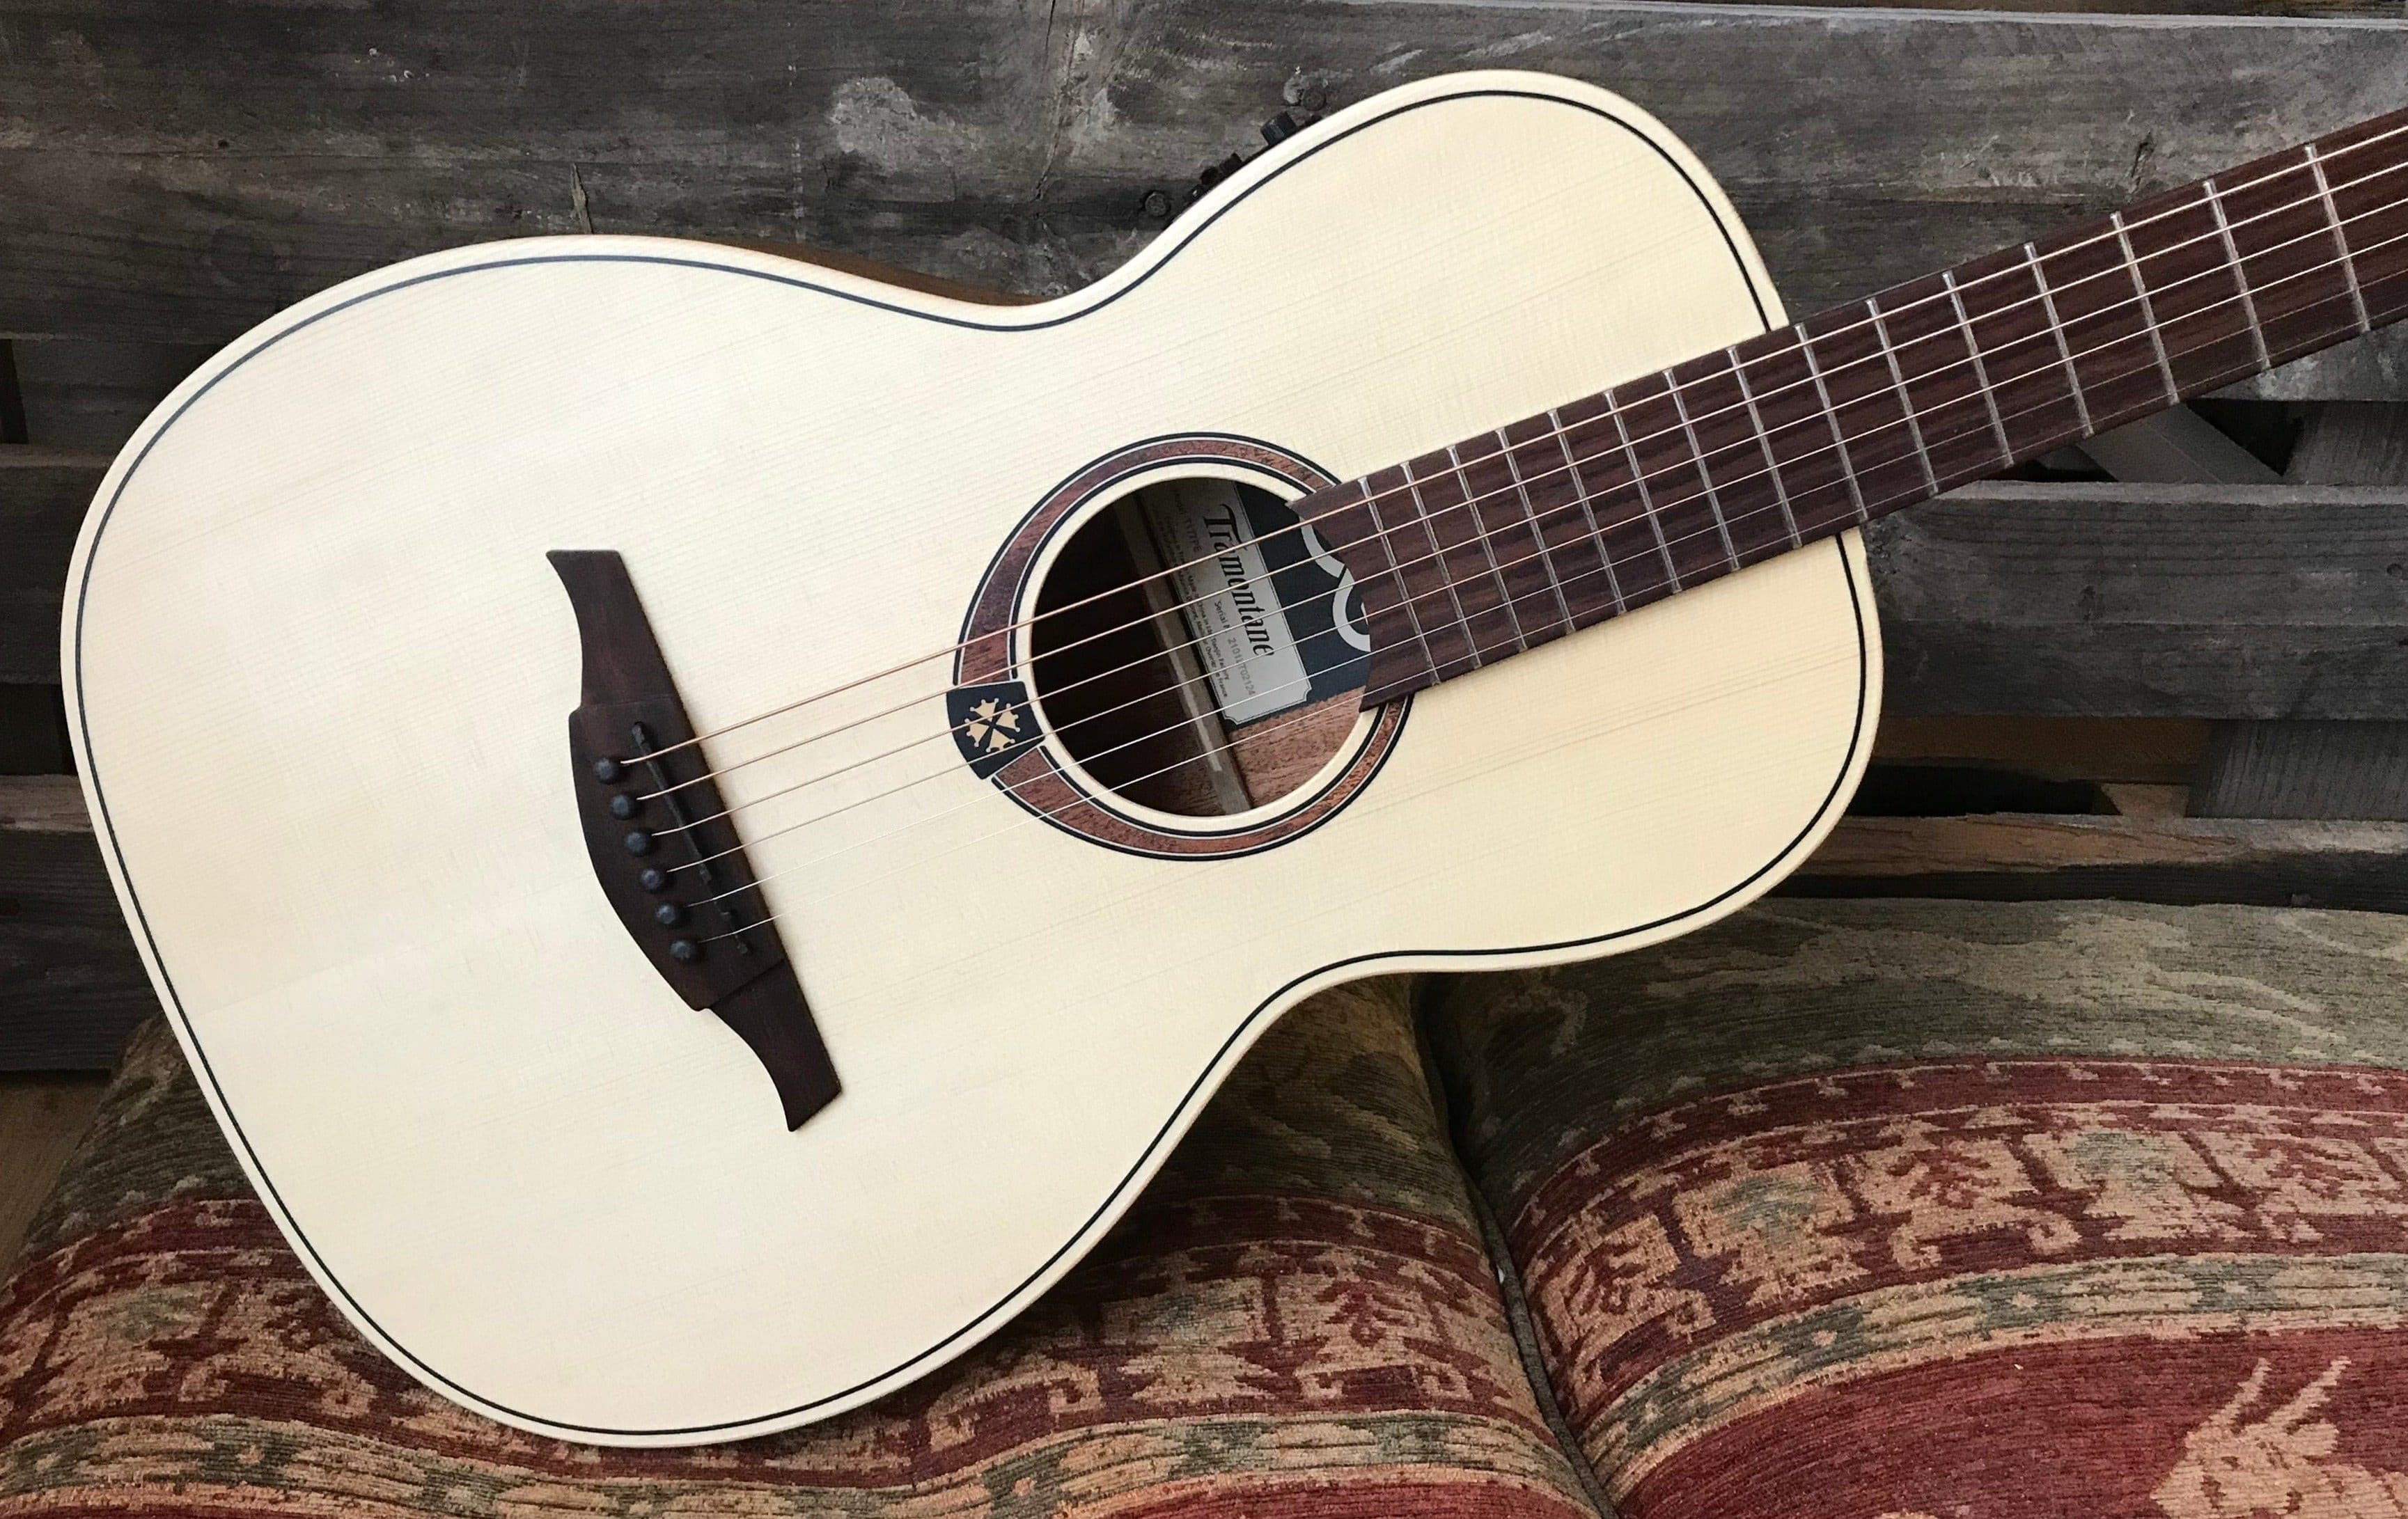 LAG T177PE Electro Acoustic Parlor - Stunning!, Electro Acoustic Guitar for sale at Richards Guitars.